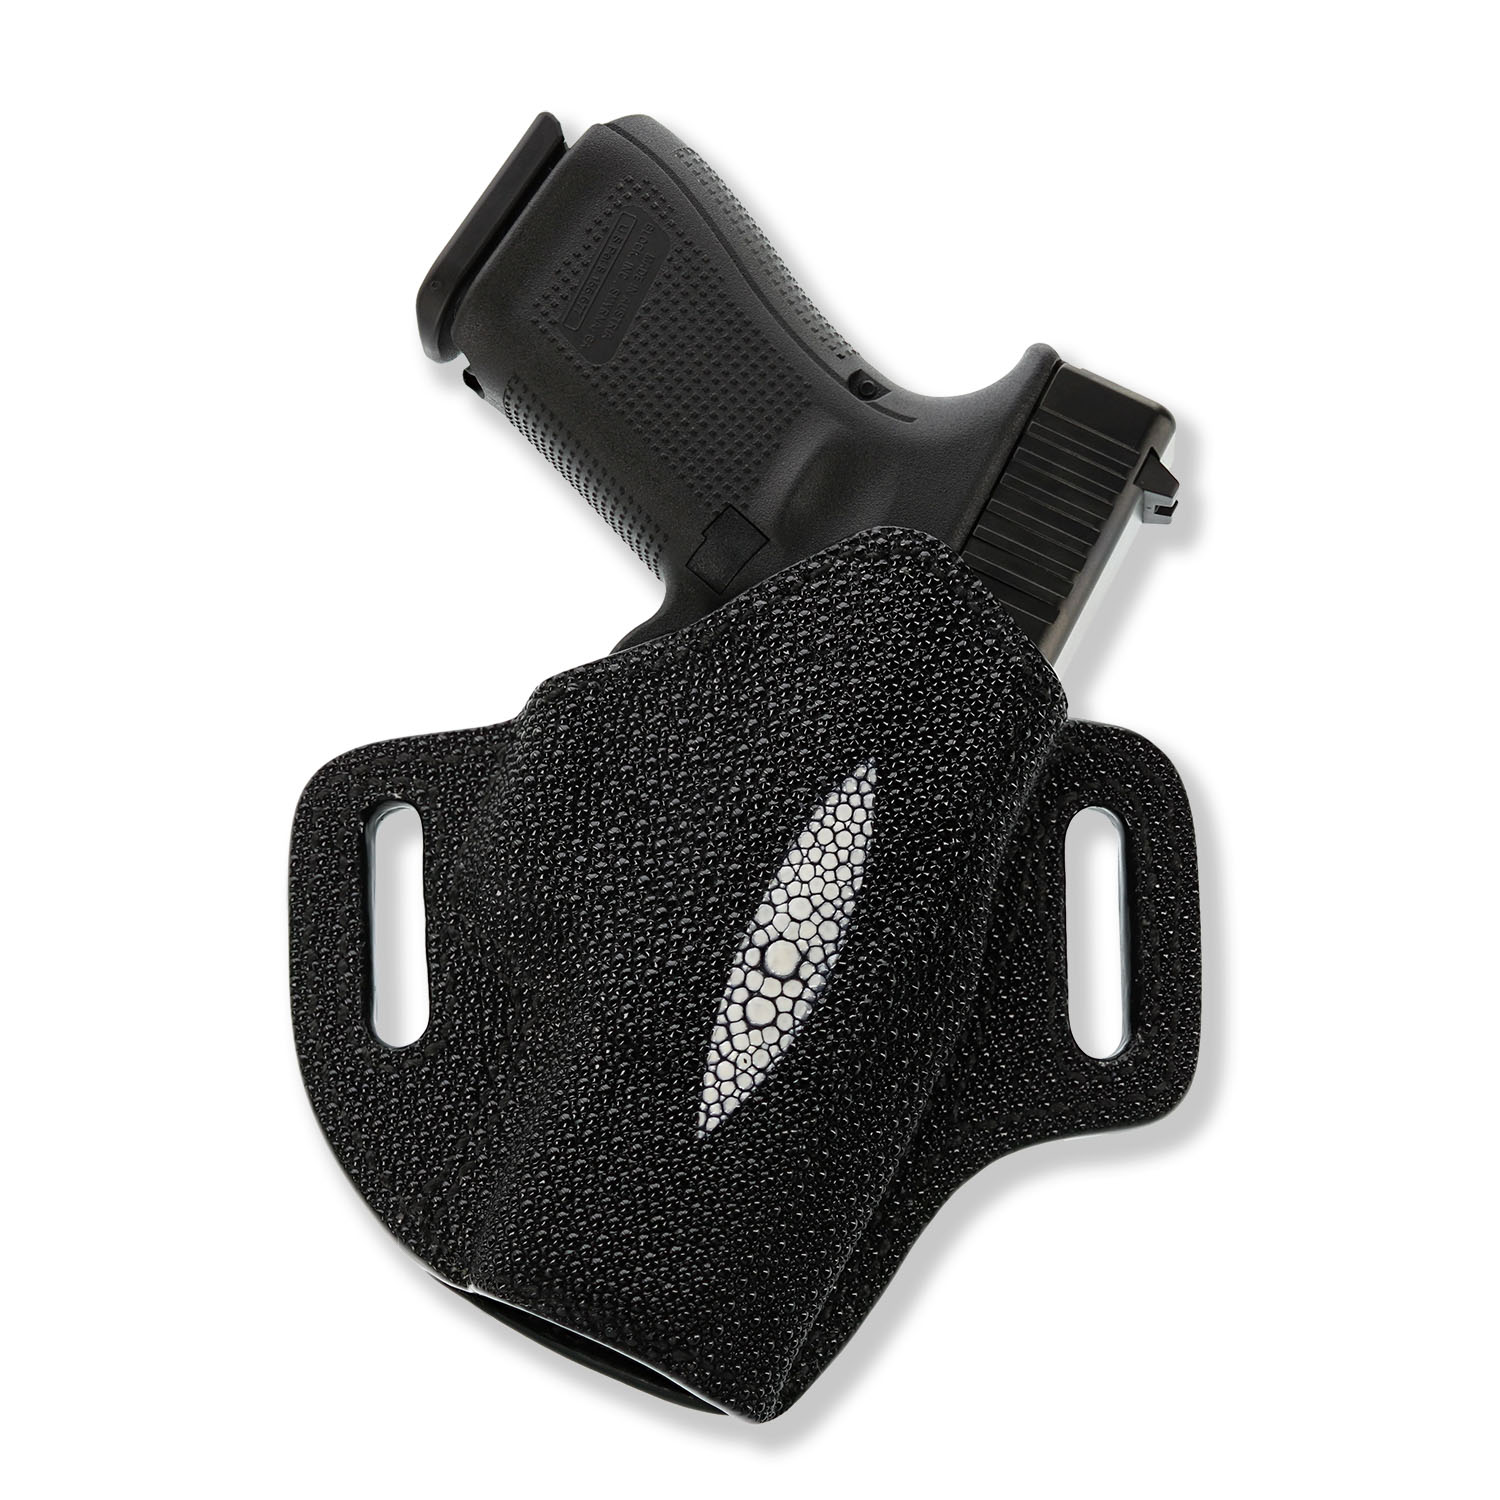 EXOTIC CONCEALABLE HOLSTER STINGRAY